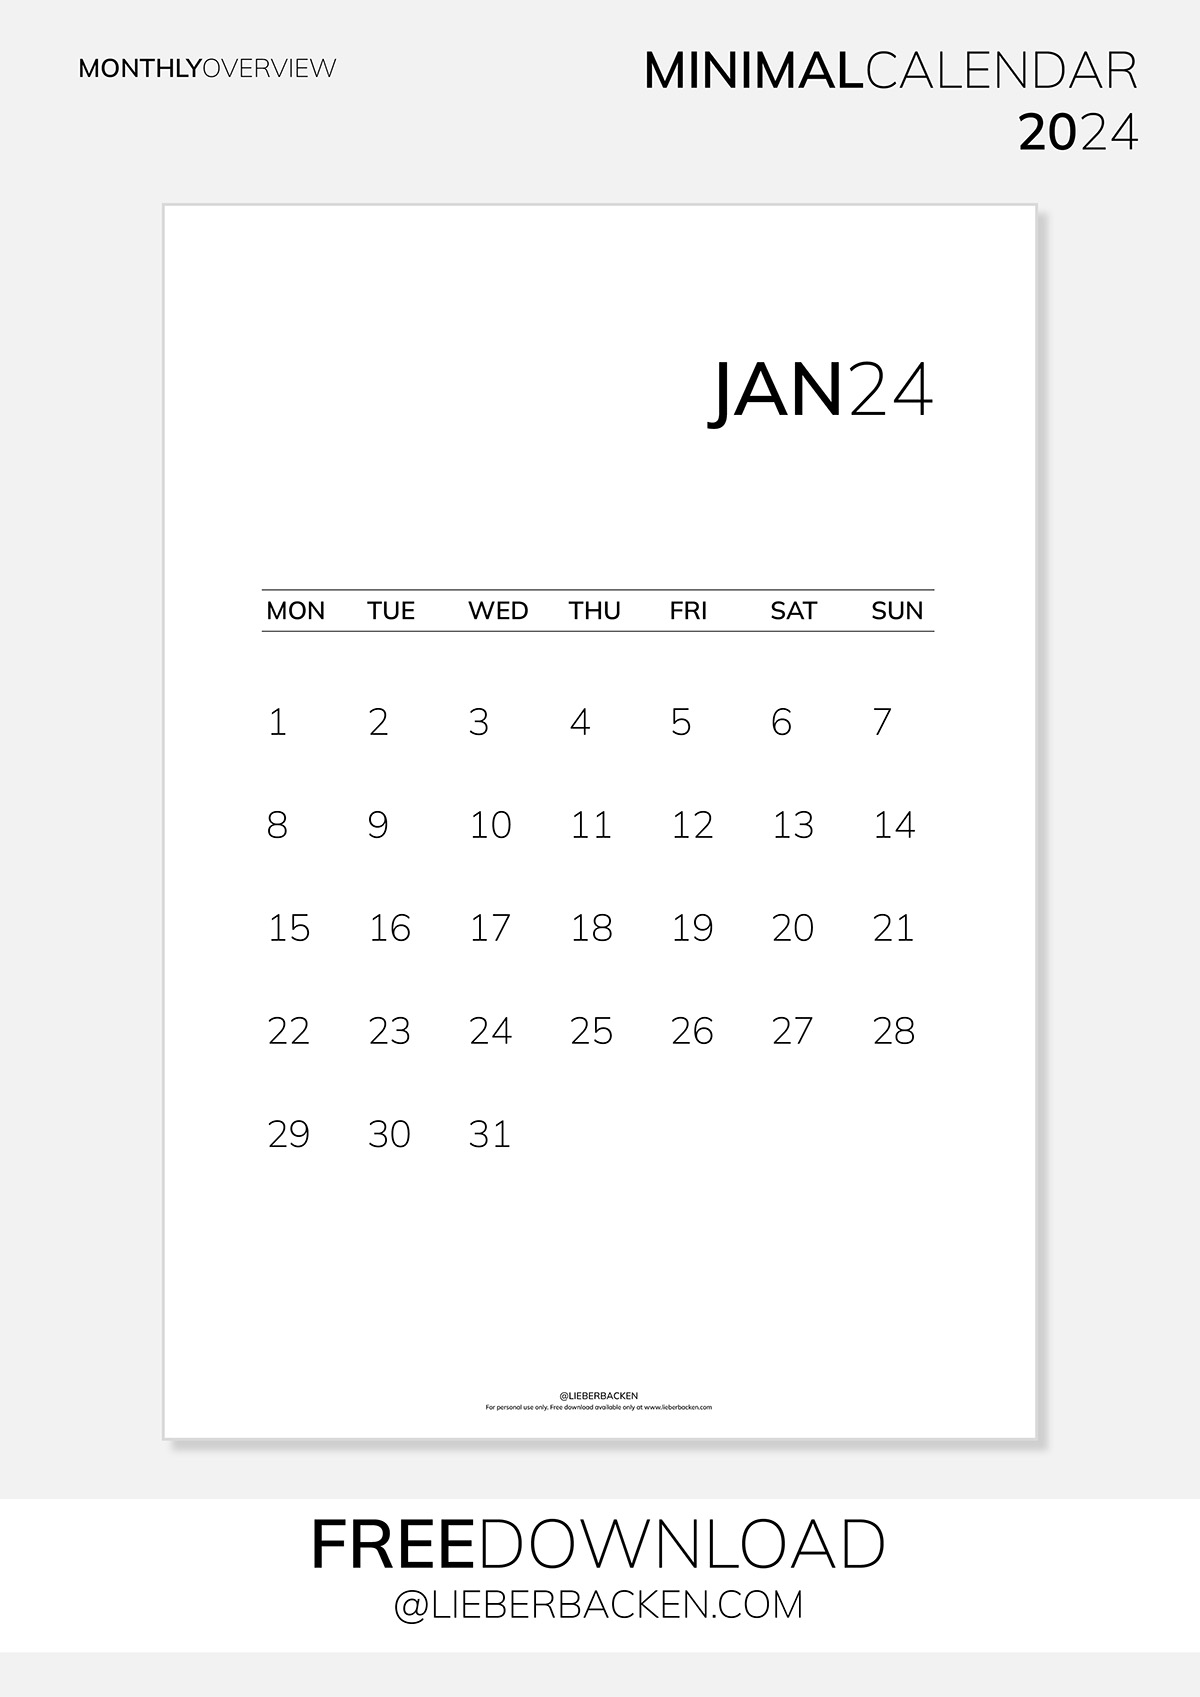 Minimal Calendar 2024 Monthly Overview - Free Download